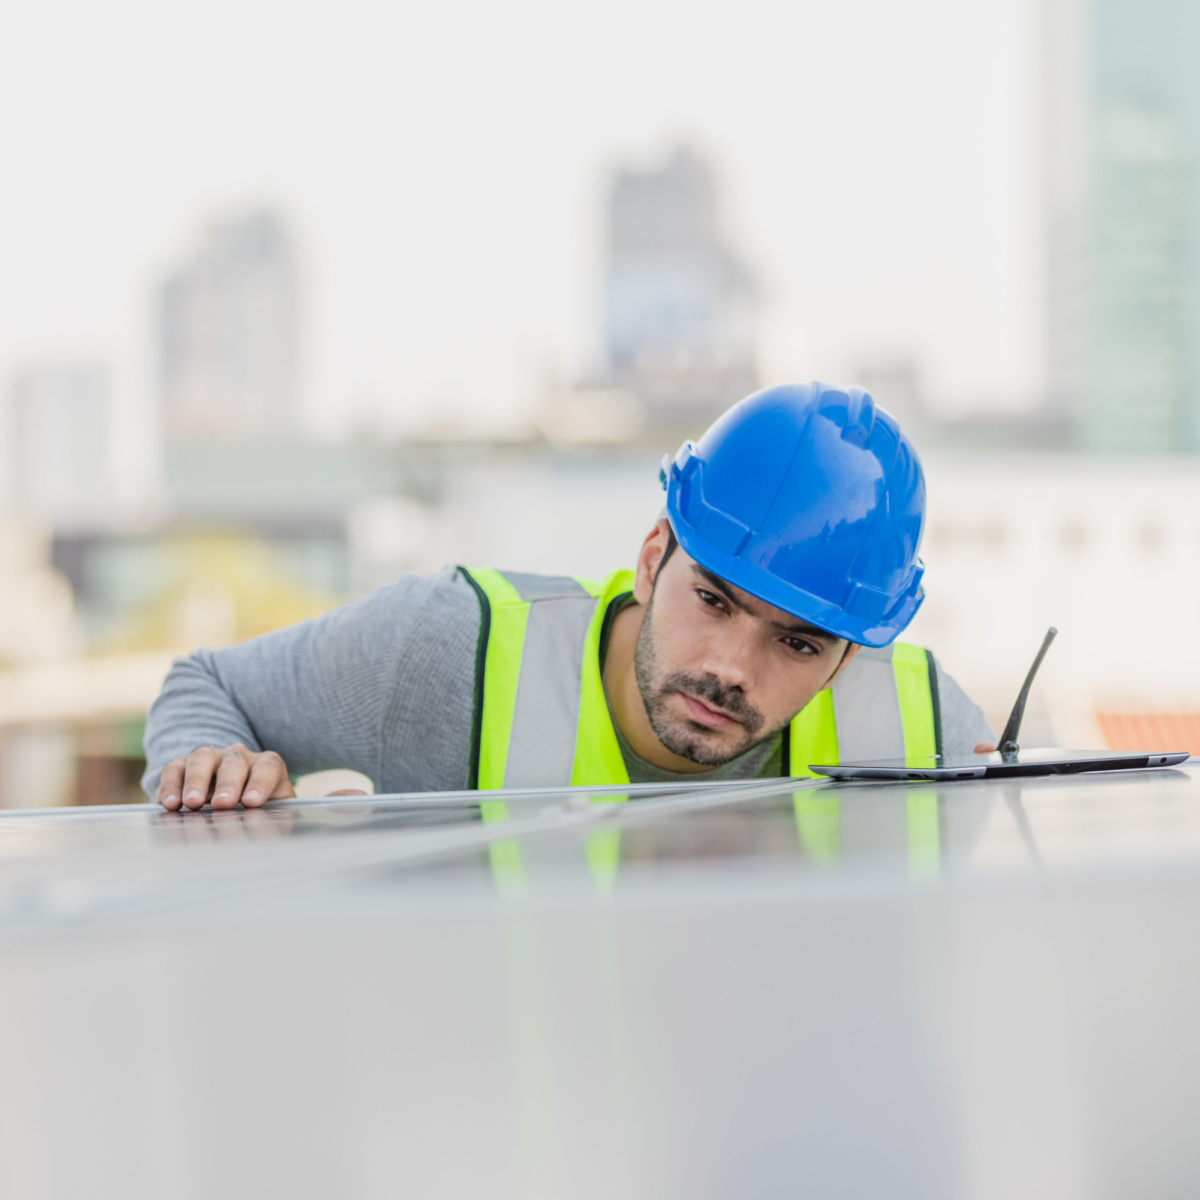 A Dallas roof inspection being performed by a Dallas roofer to look for signs of Dallas roof damage and see if any Dallas roof repair are required.